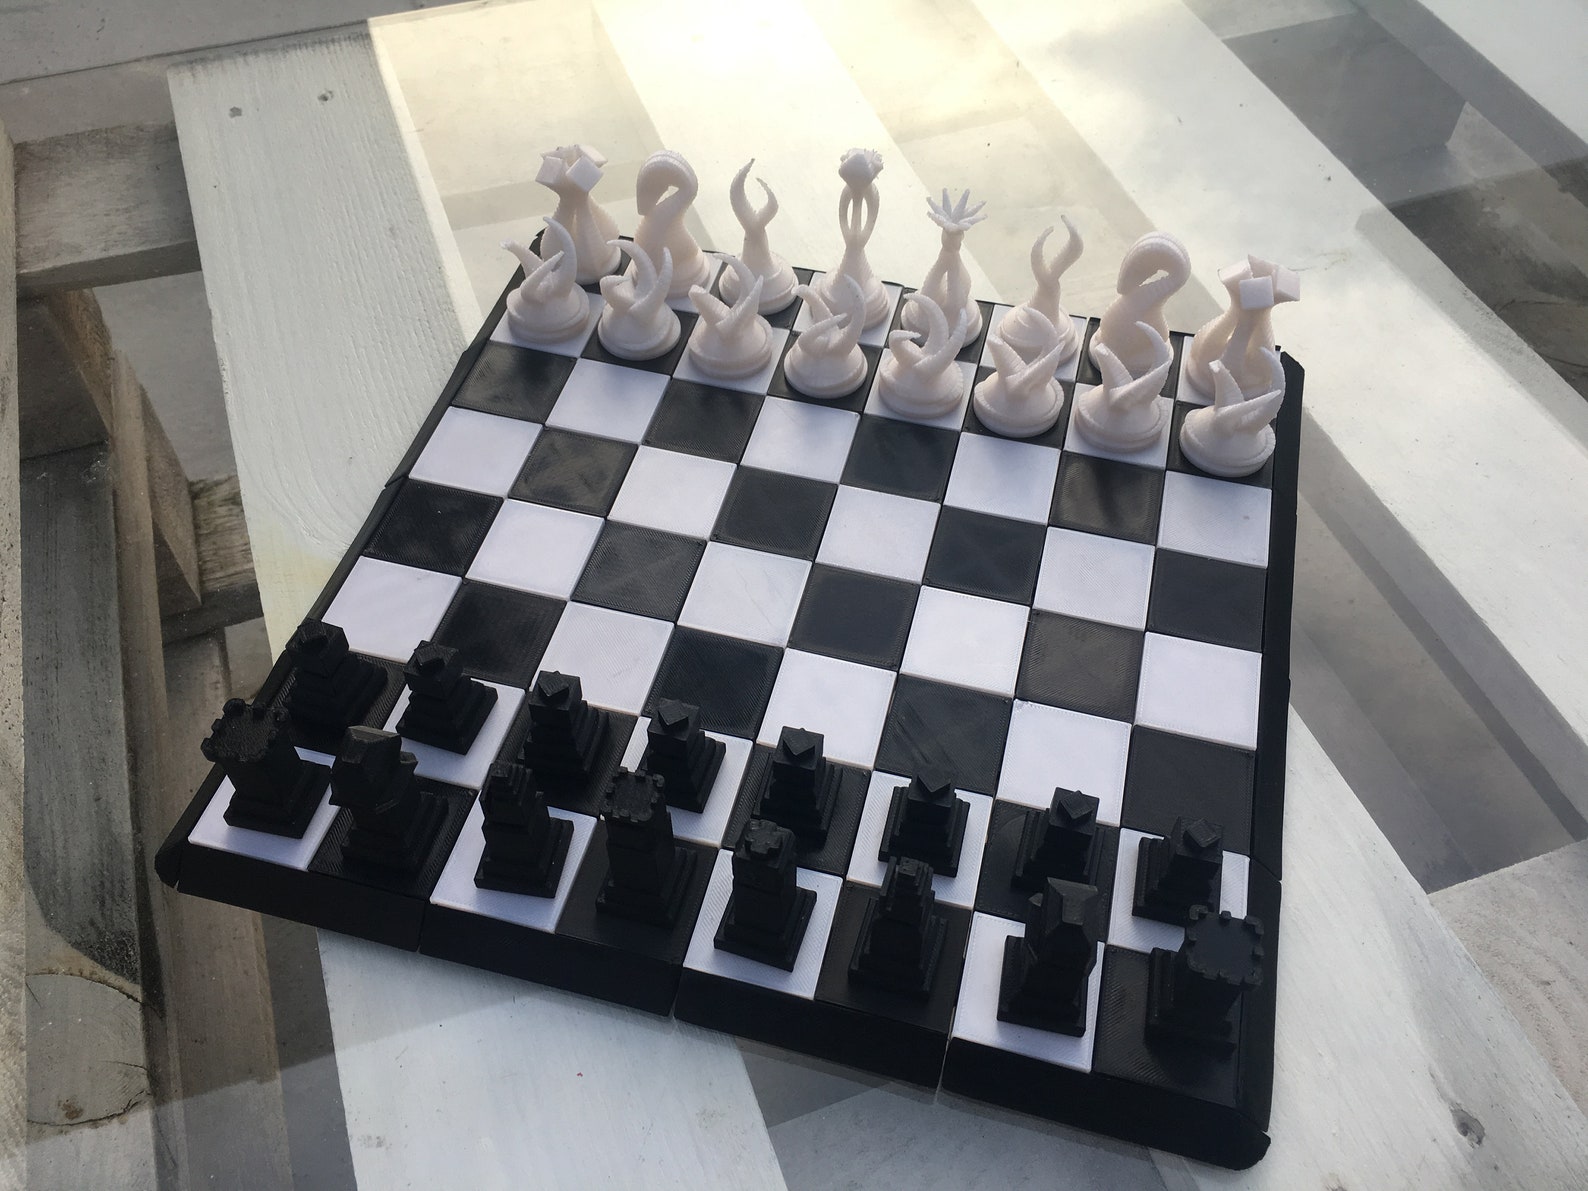 Alien Chess Pieces Luxury Fantasy Custom Made Chess Pieces Etsy